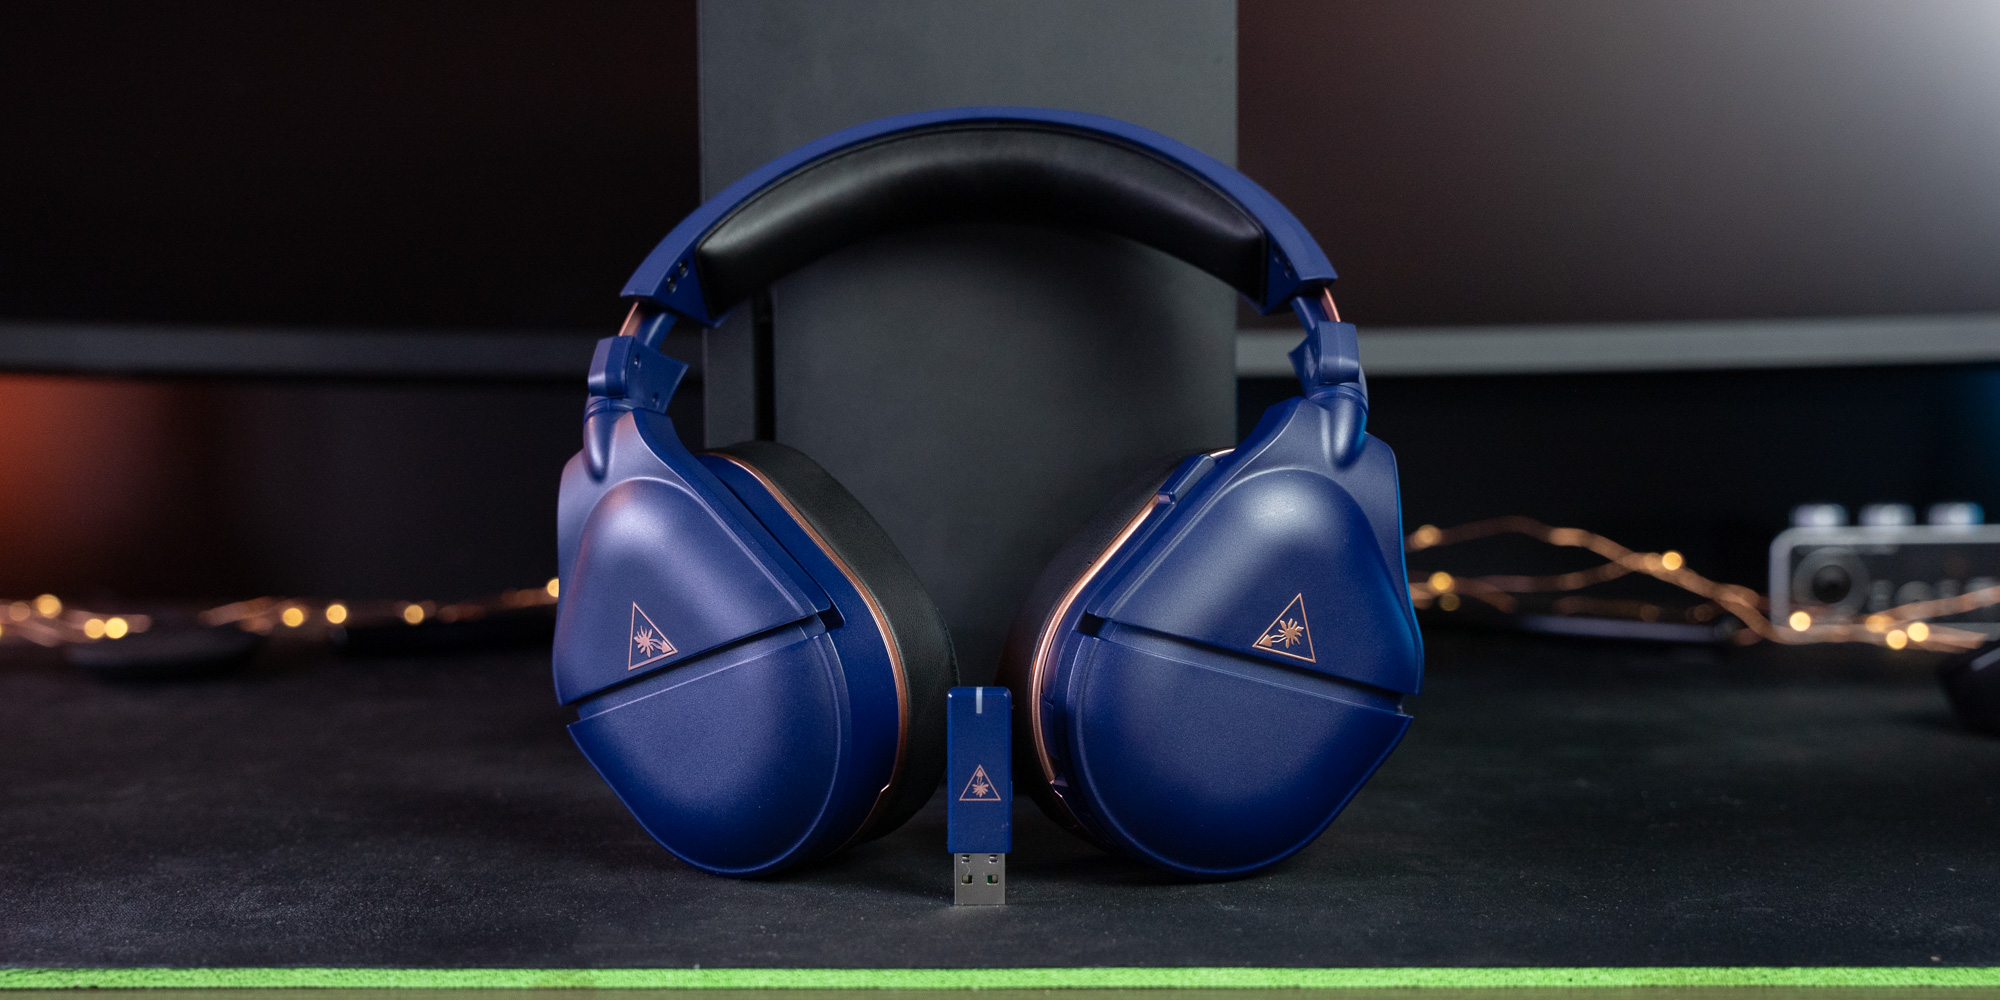 Accommodatie Geleend Anzai Stealth 700 Gen 2 Max Review: Turtle Beach delivers huge compatibility